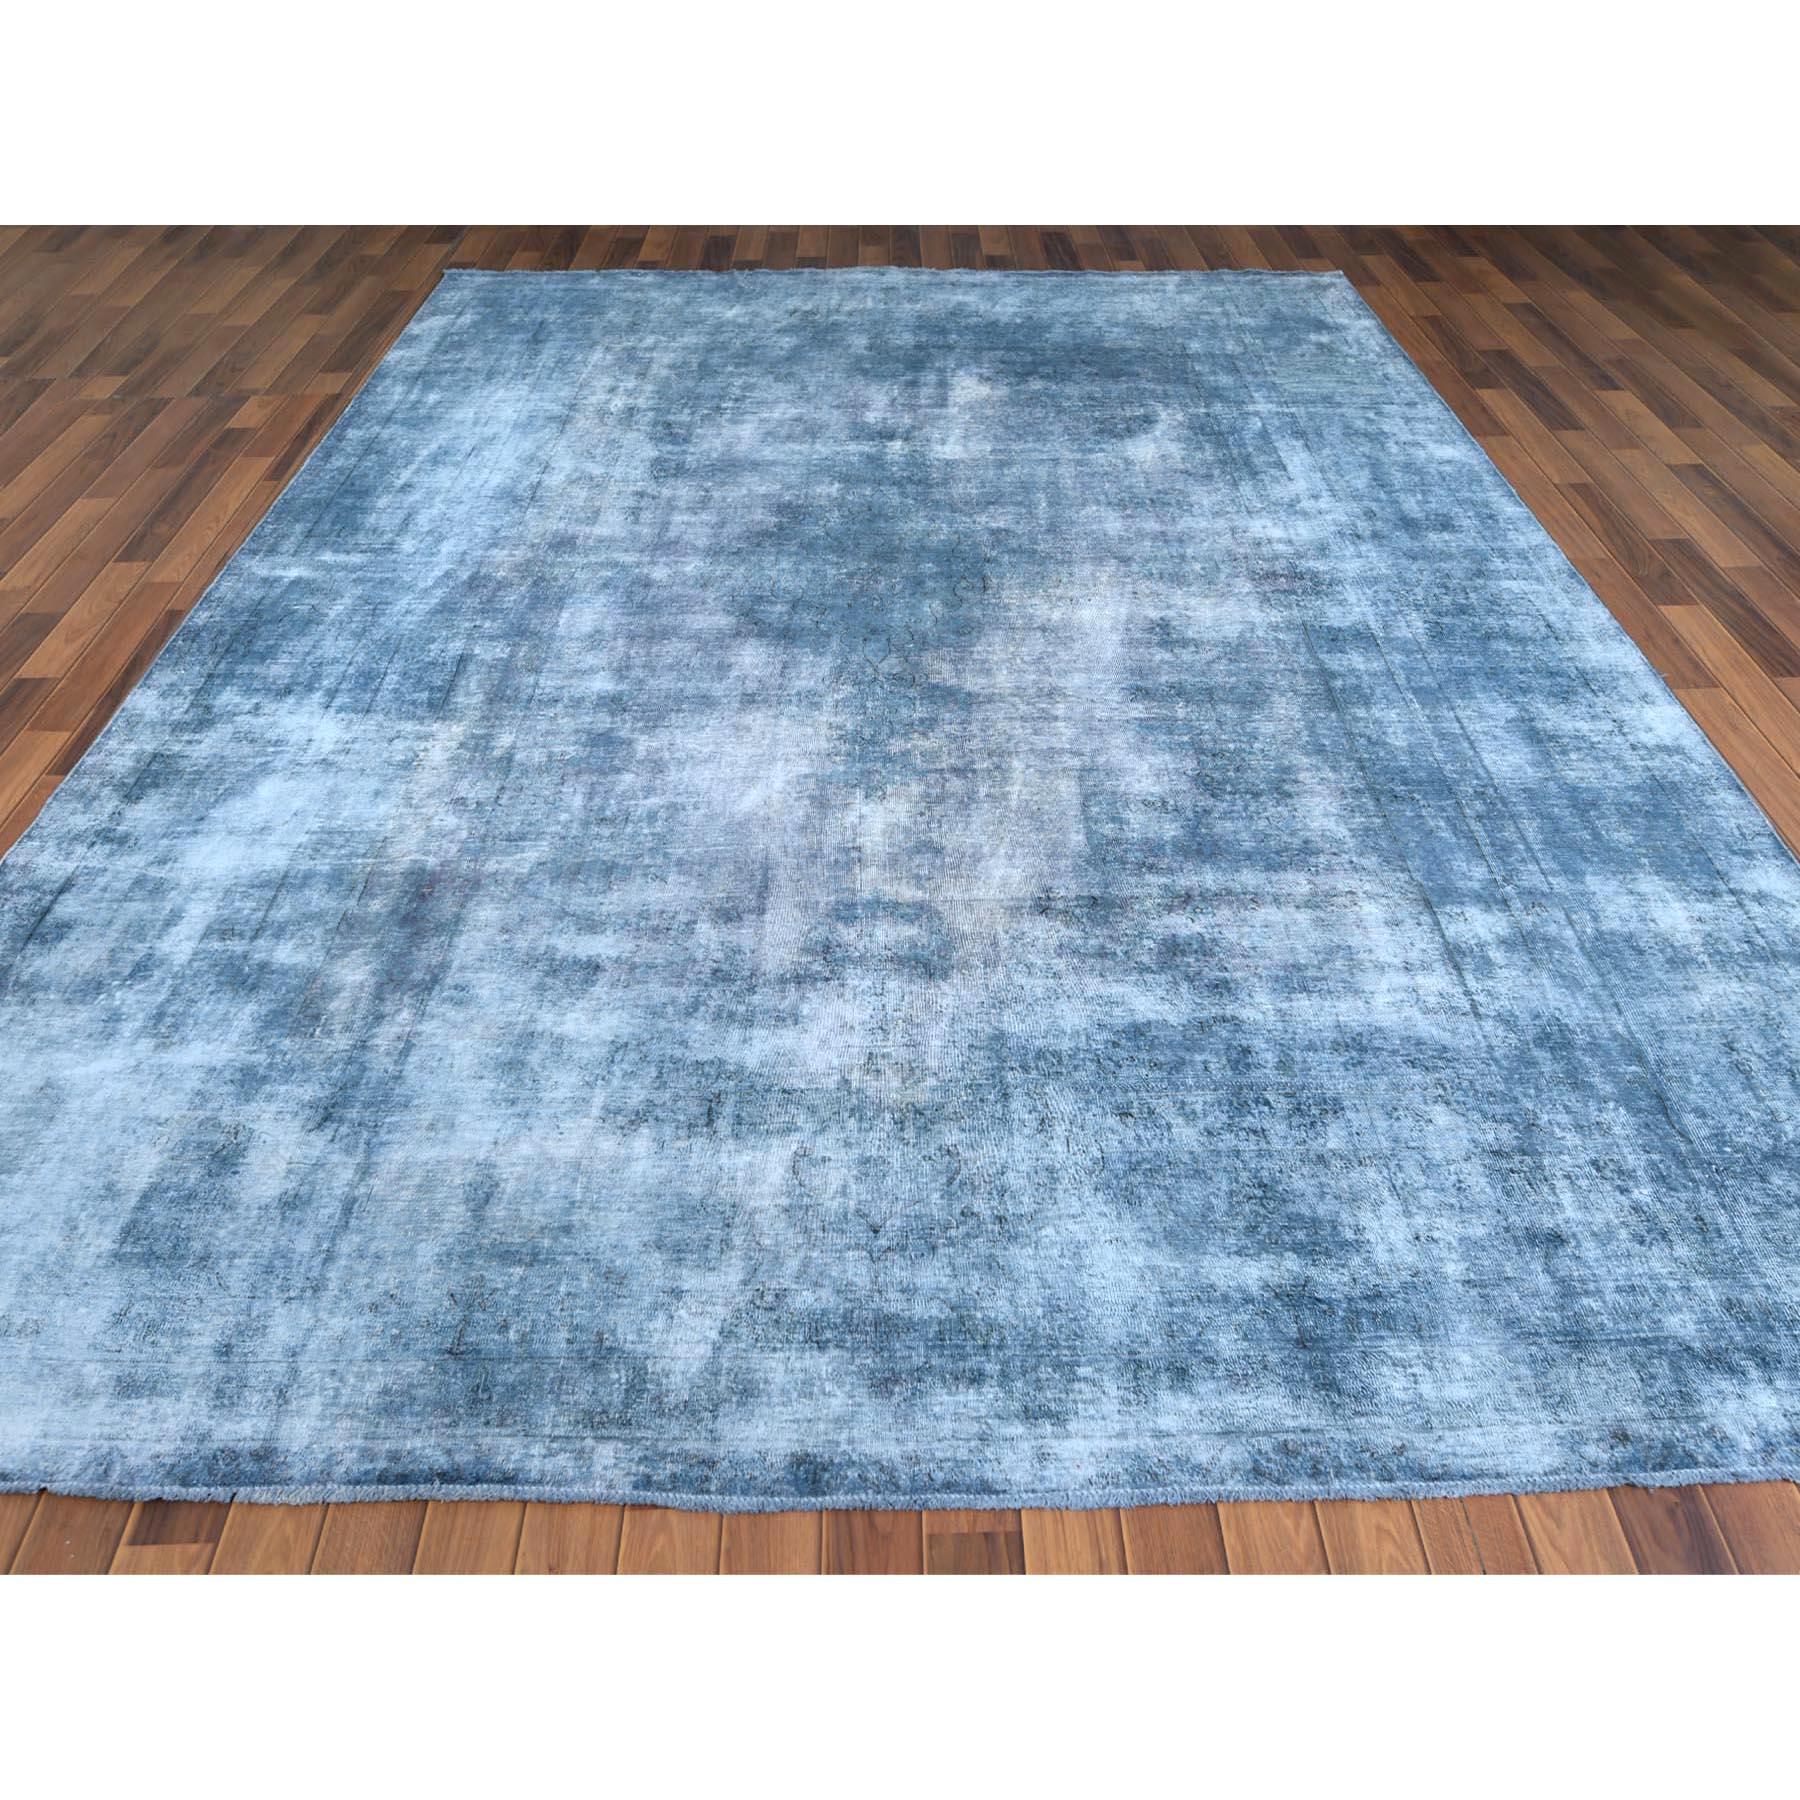 Medieval Shades of Blue Hand Knotted Old Persian Kerman Oriental Rug